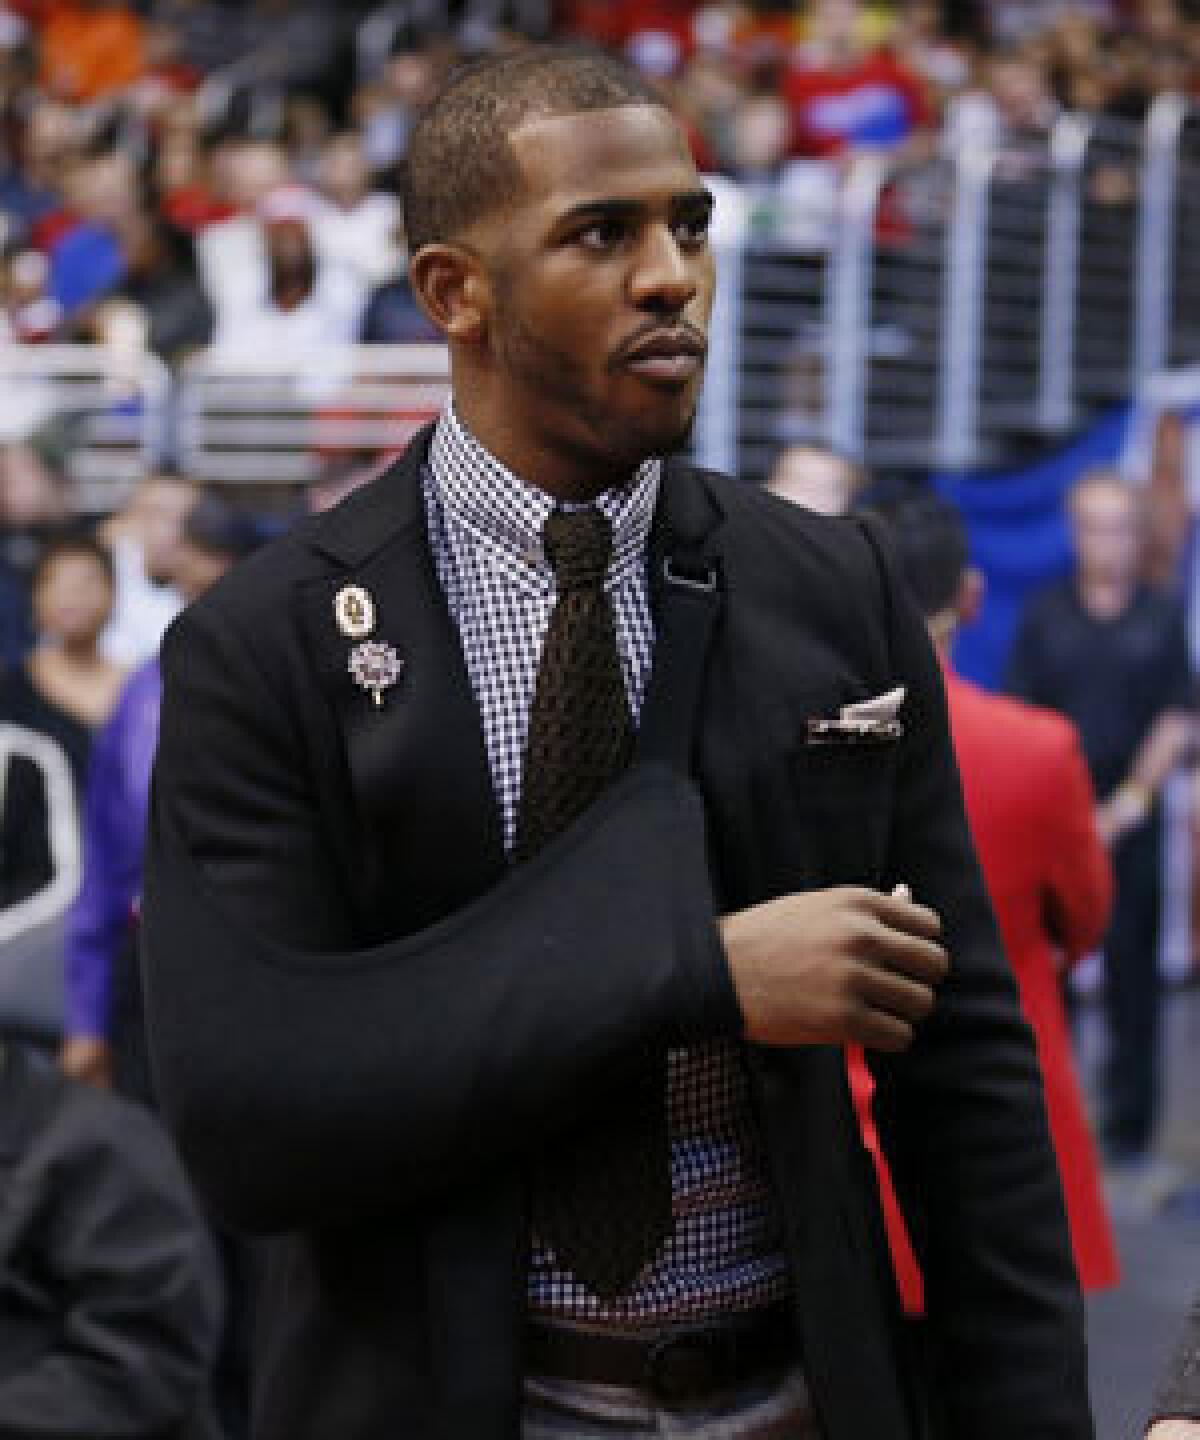 The injured Chris Paul has dropped in All-Star voting.